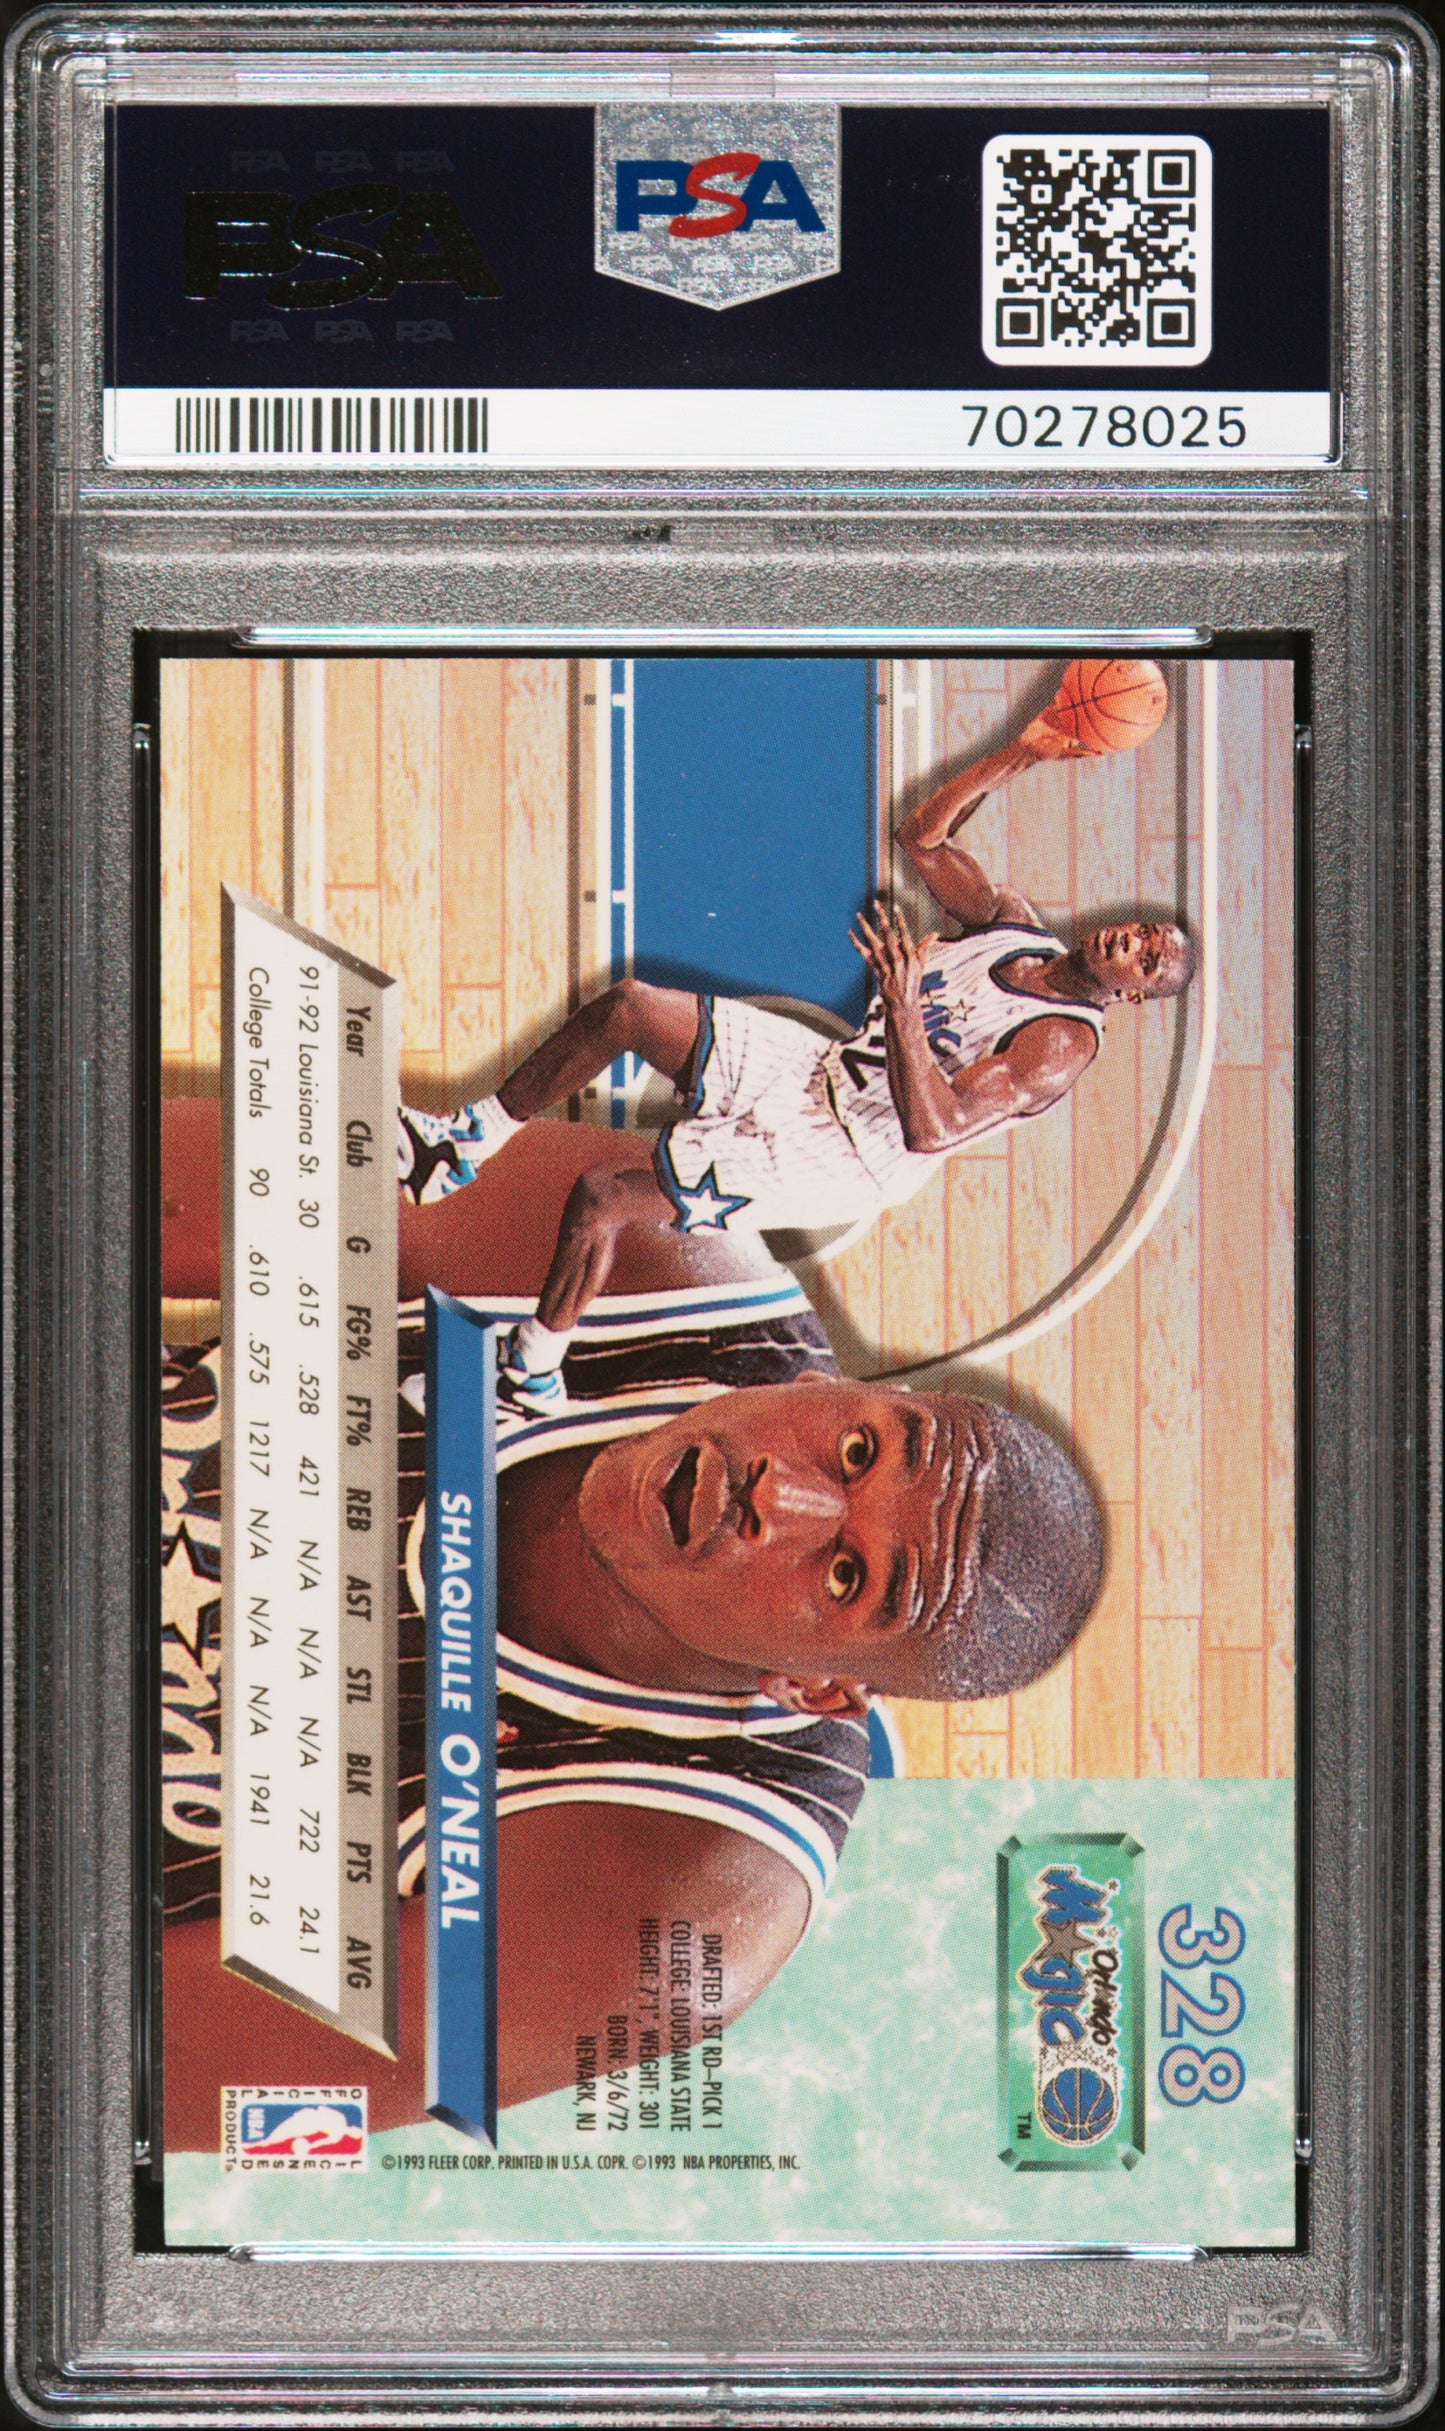 1992 Ultra #328 Shaquille O'Neal PSA 8